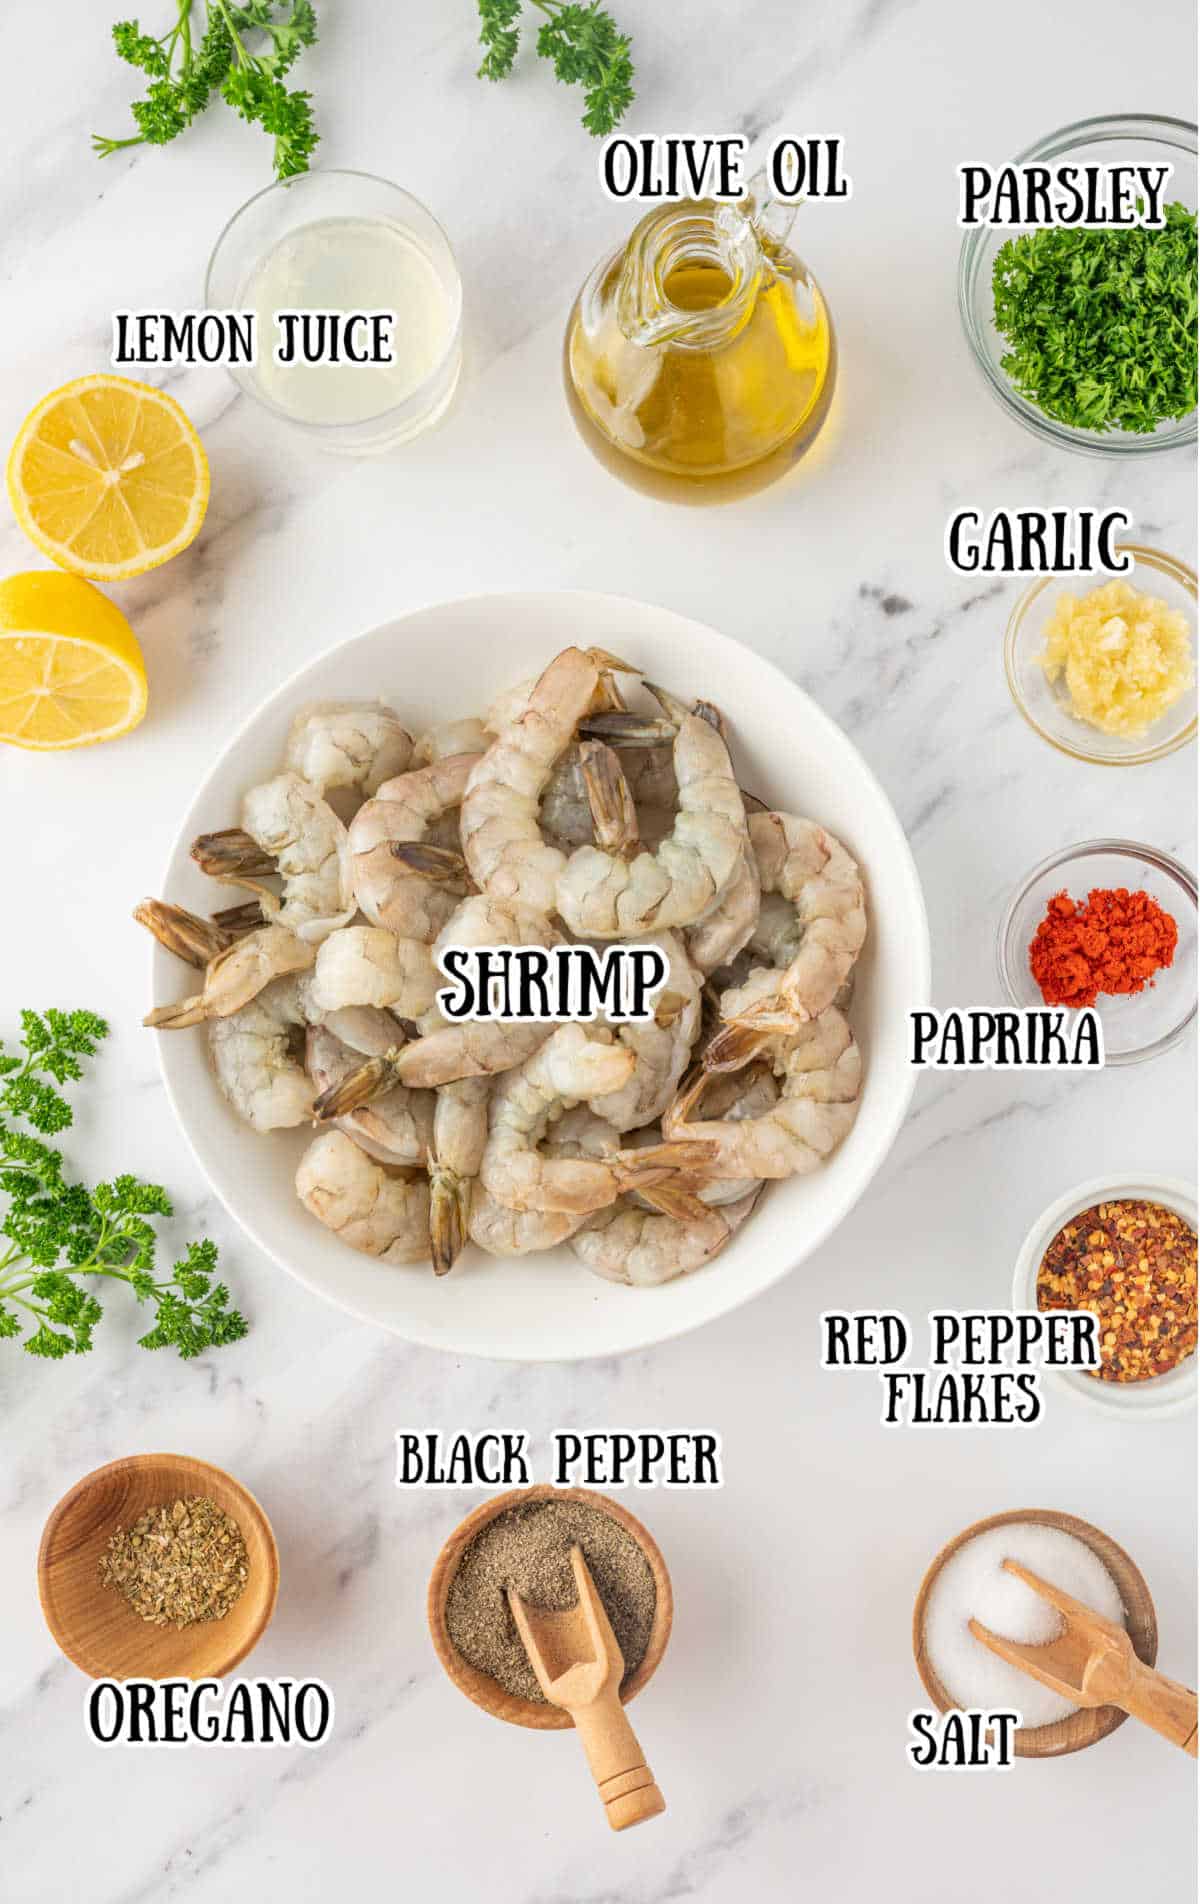 All the ingredients needed for this Texas Roadhouse grilled shrimp.